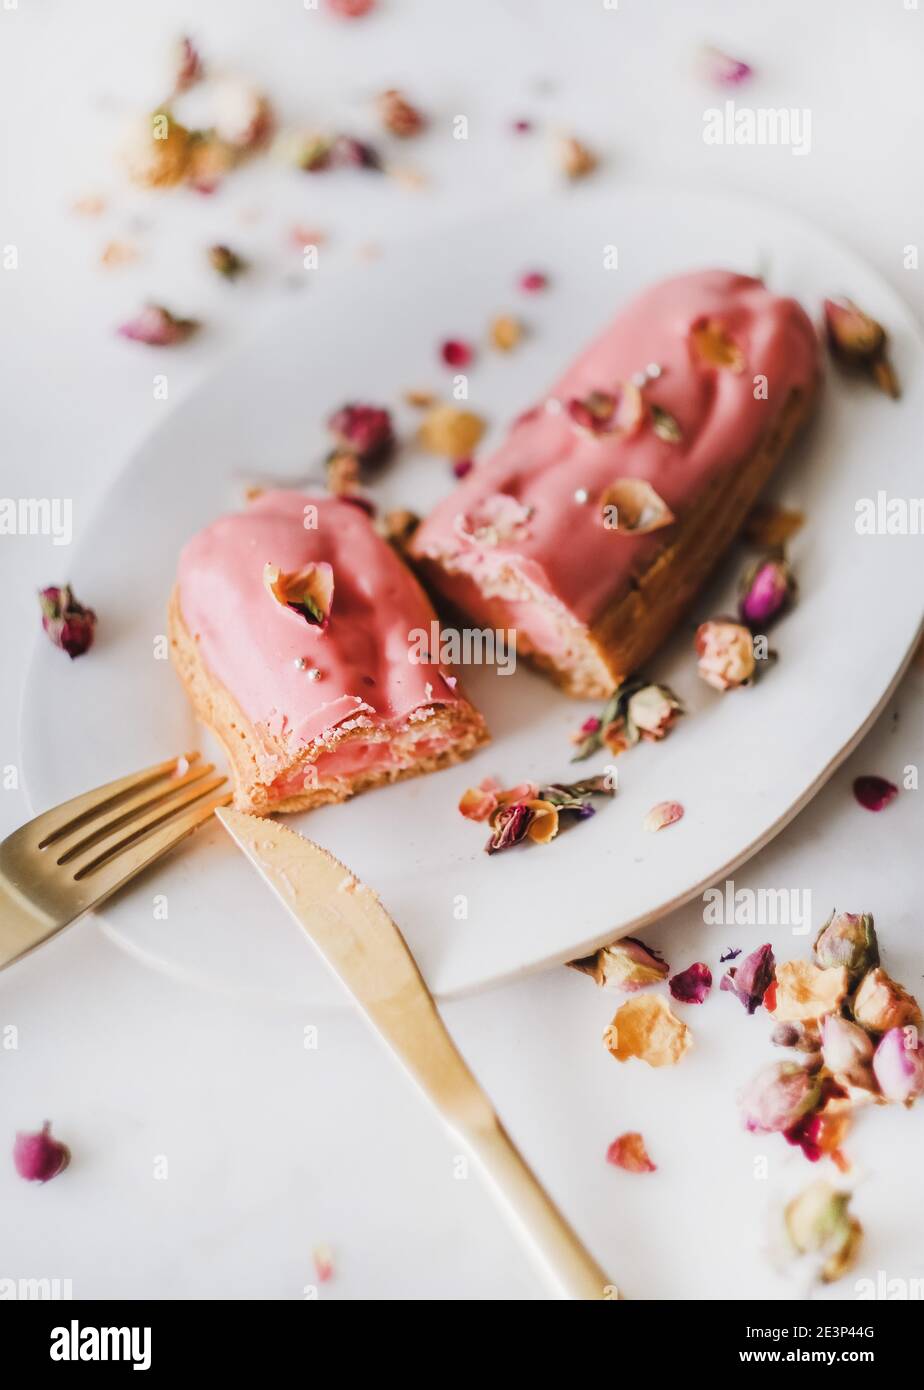 Rose eclair dessert with dried rose petals on white oval plate with golden cutlery over white marble background, selective focus. Artisan homemade desserts concept Stock Photo